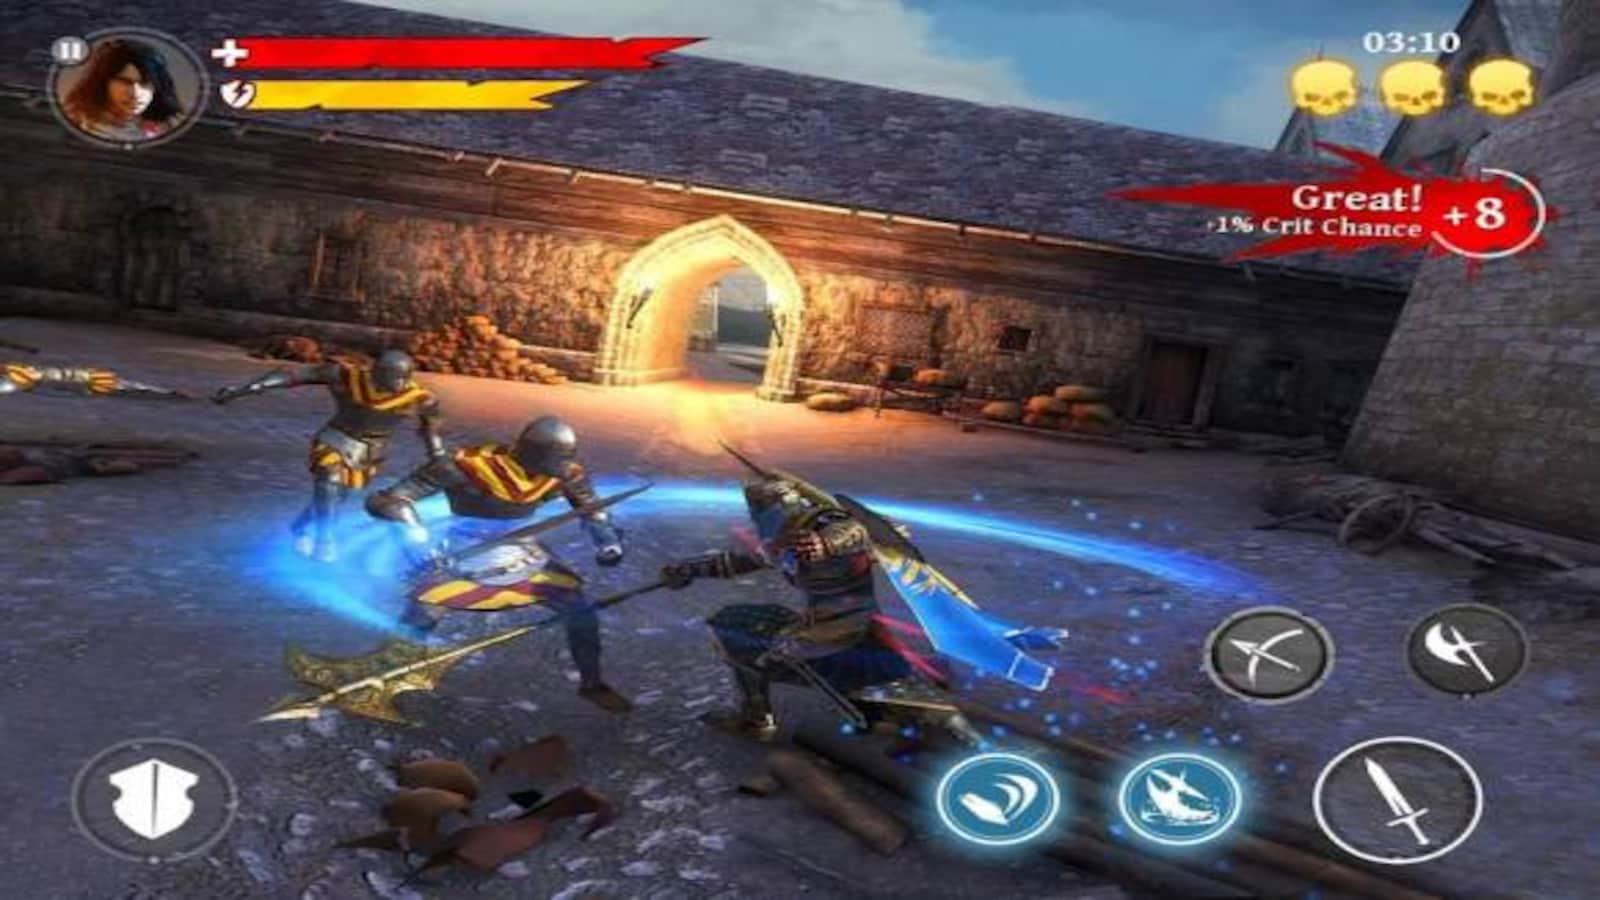 Fortress: Destroyer APK for Android Free Download